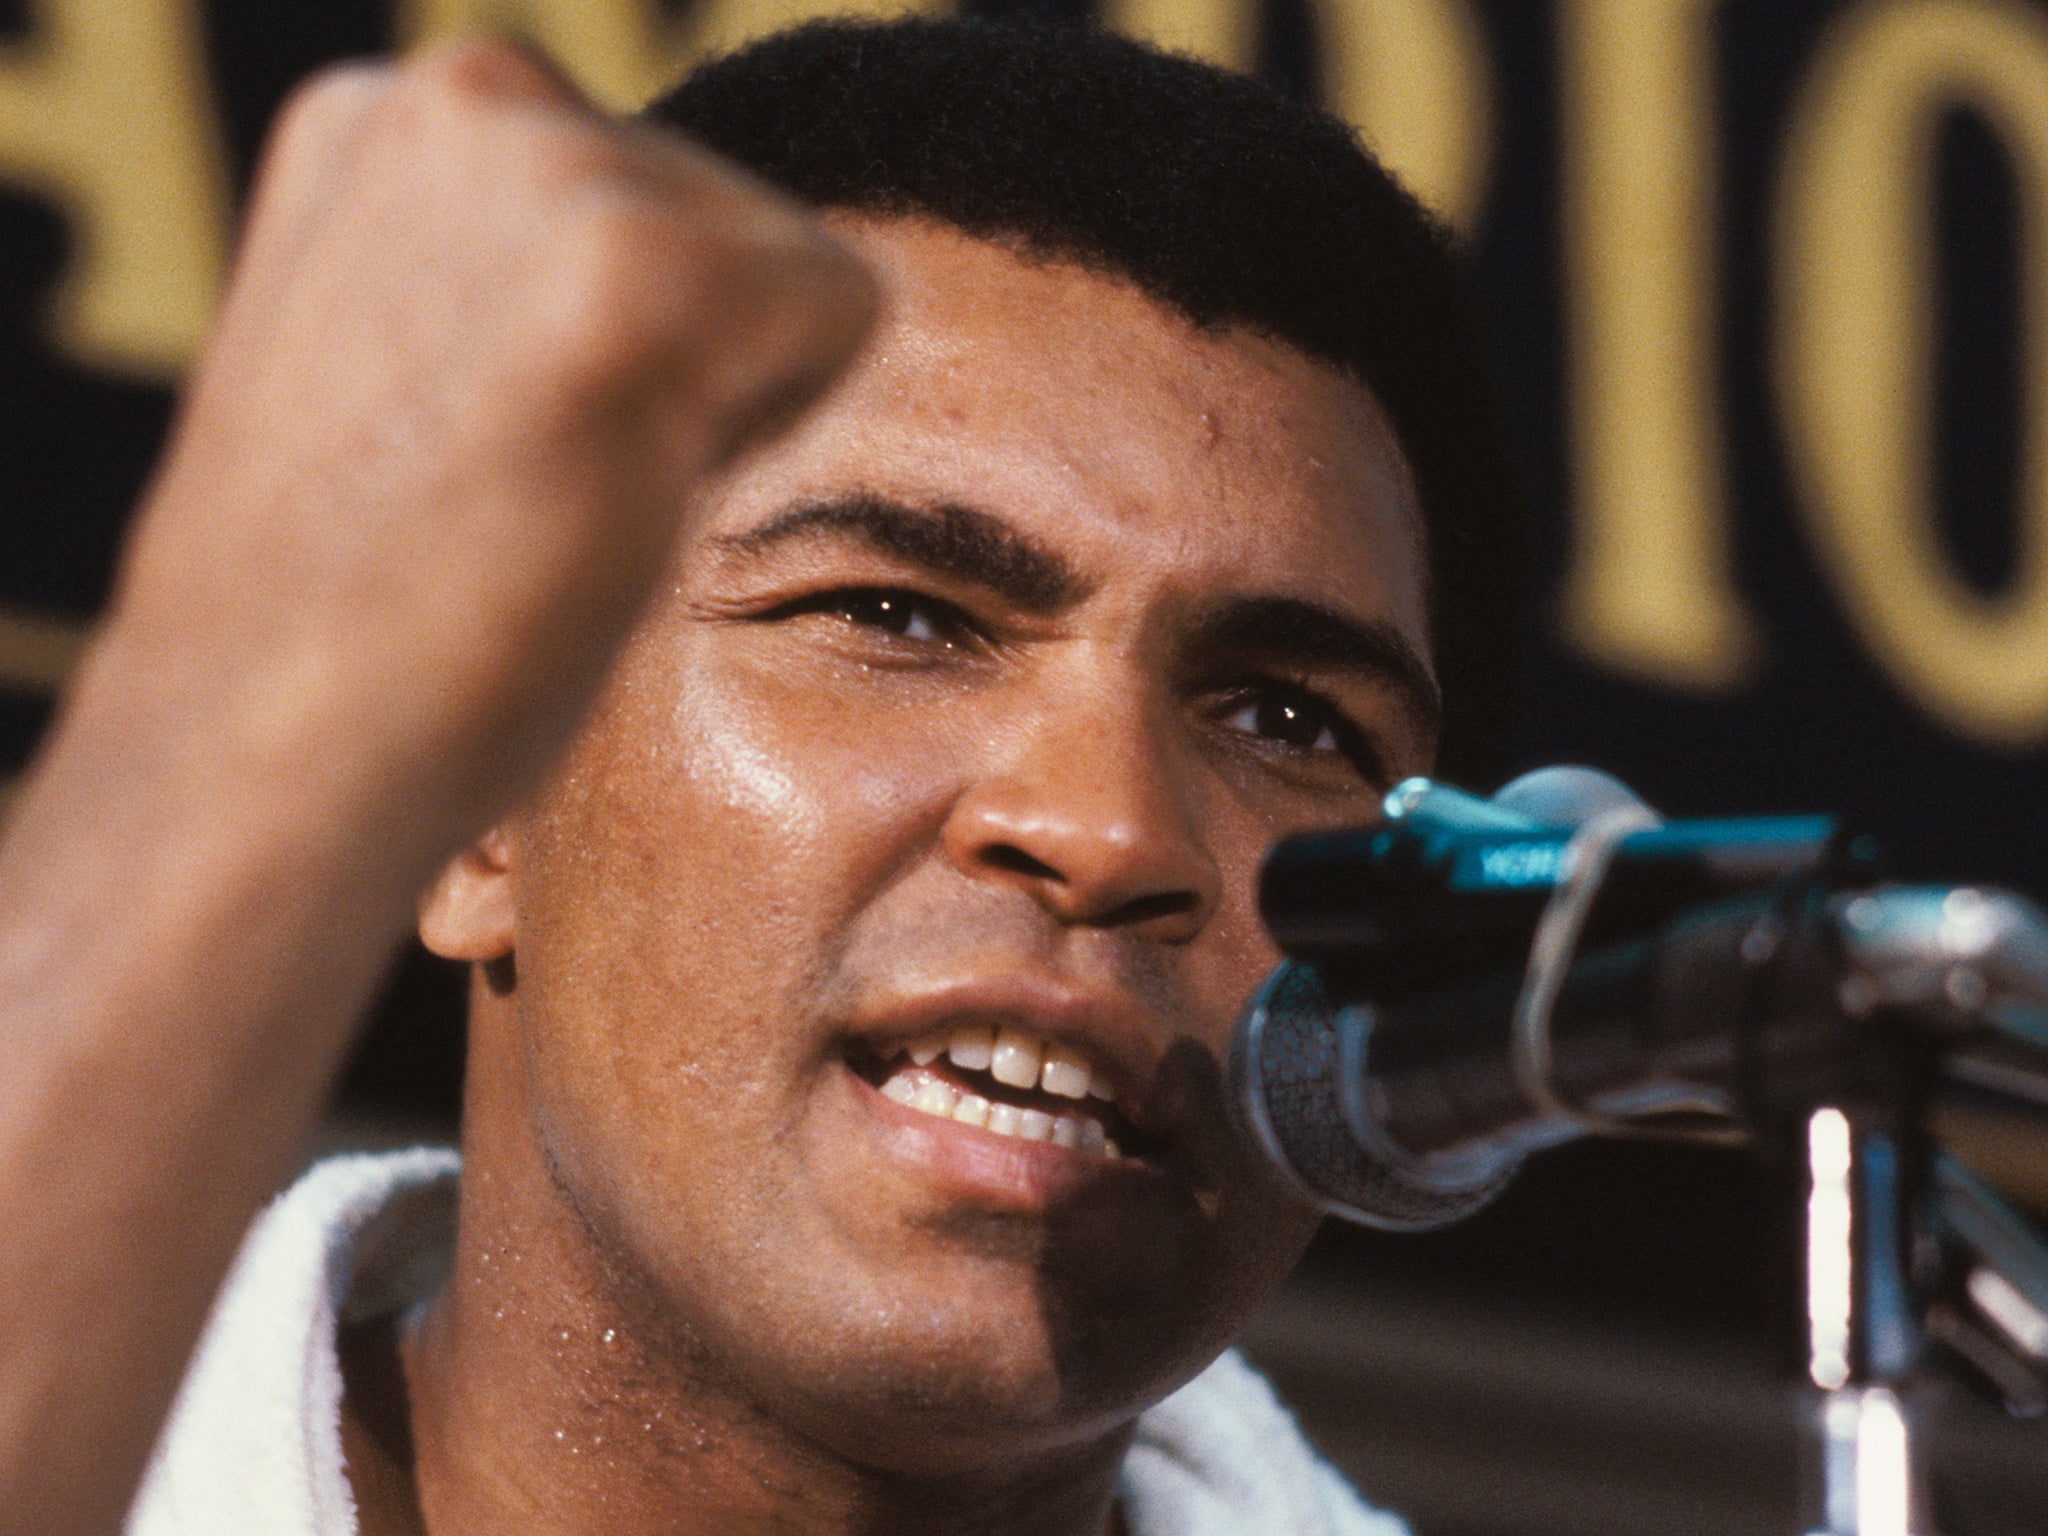 Ali, pictured during the build-up before his 1980 defeat to former sparring partner Larry Holmes